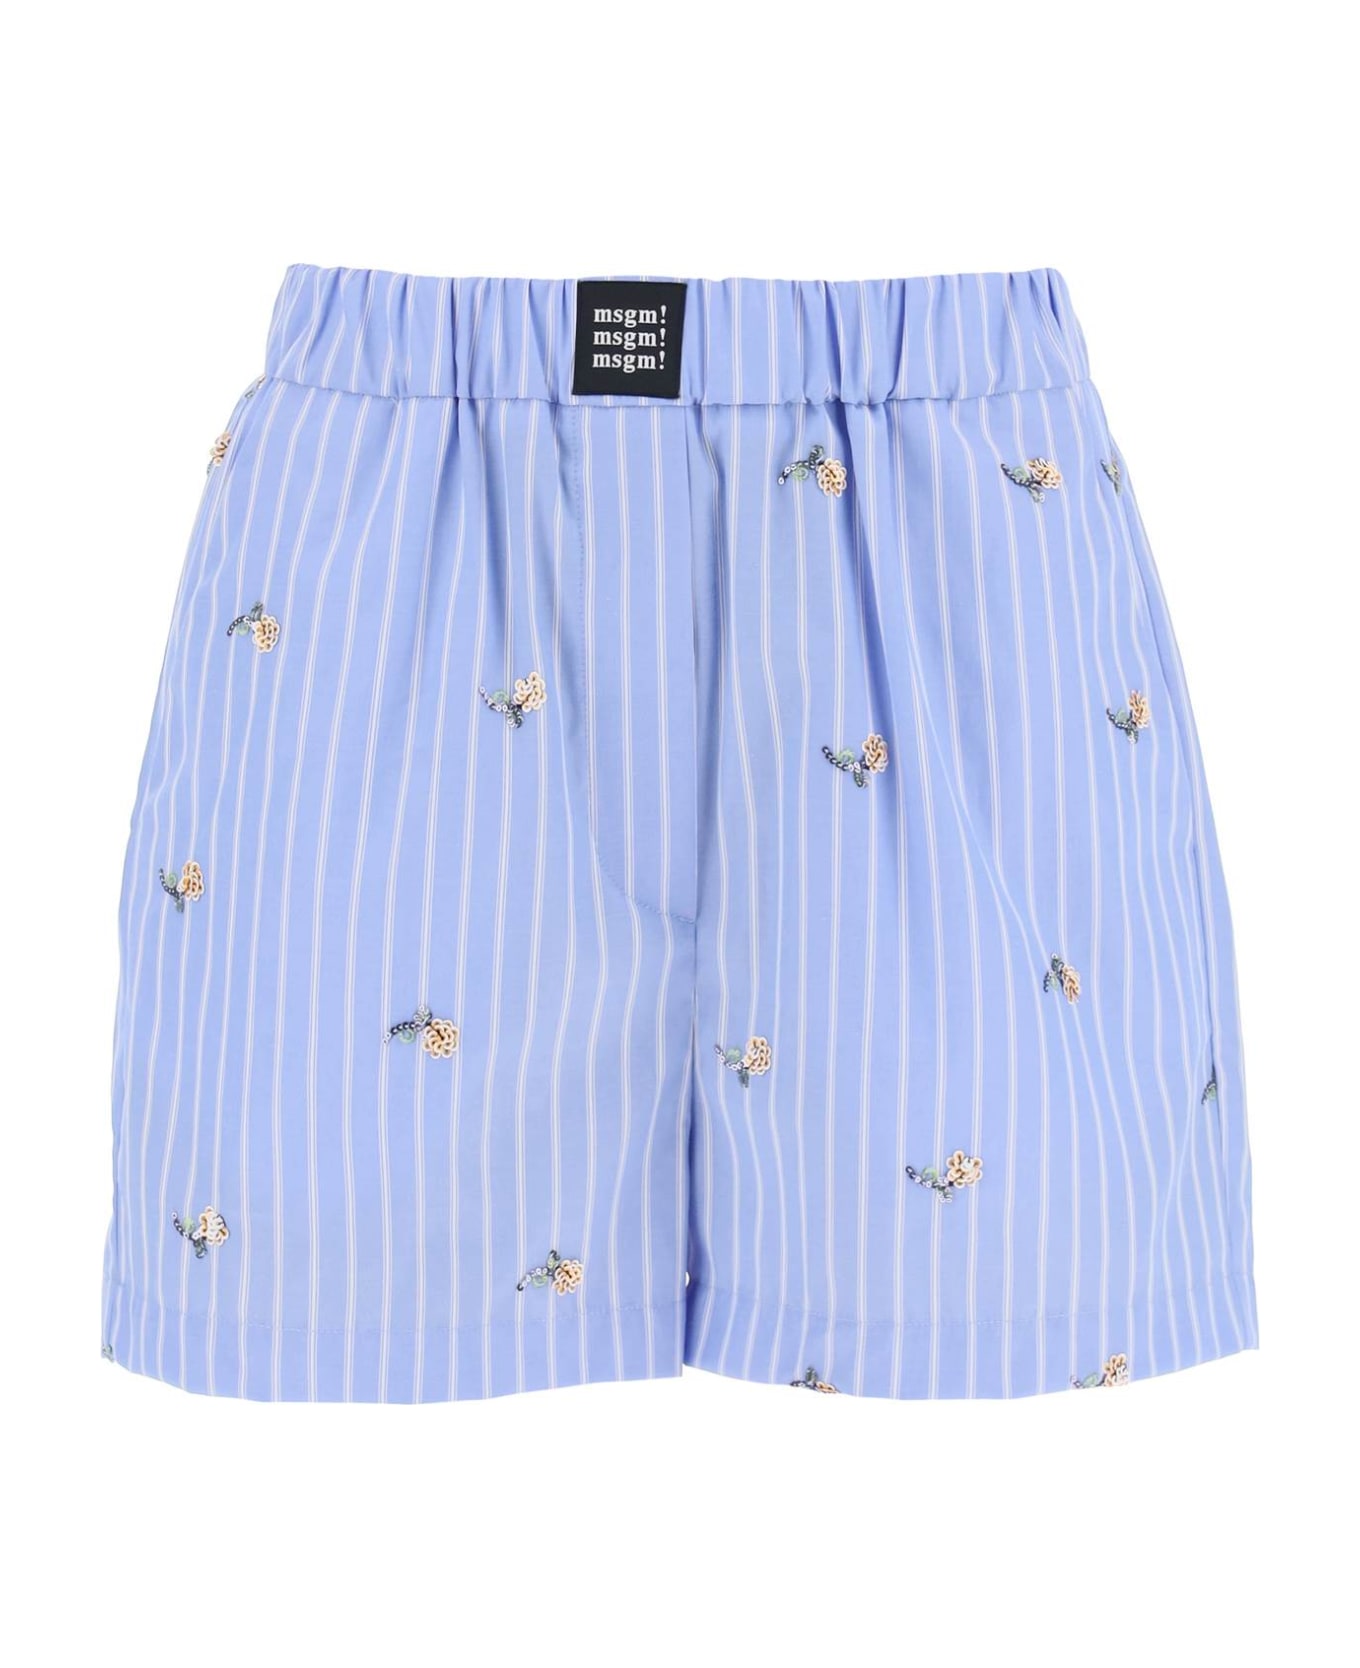 MSGM Striped Poplin Shorts With Sequin Flowers - LIGHT BLUE (White) ショートパンツ